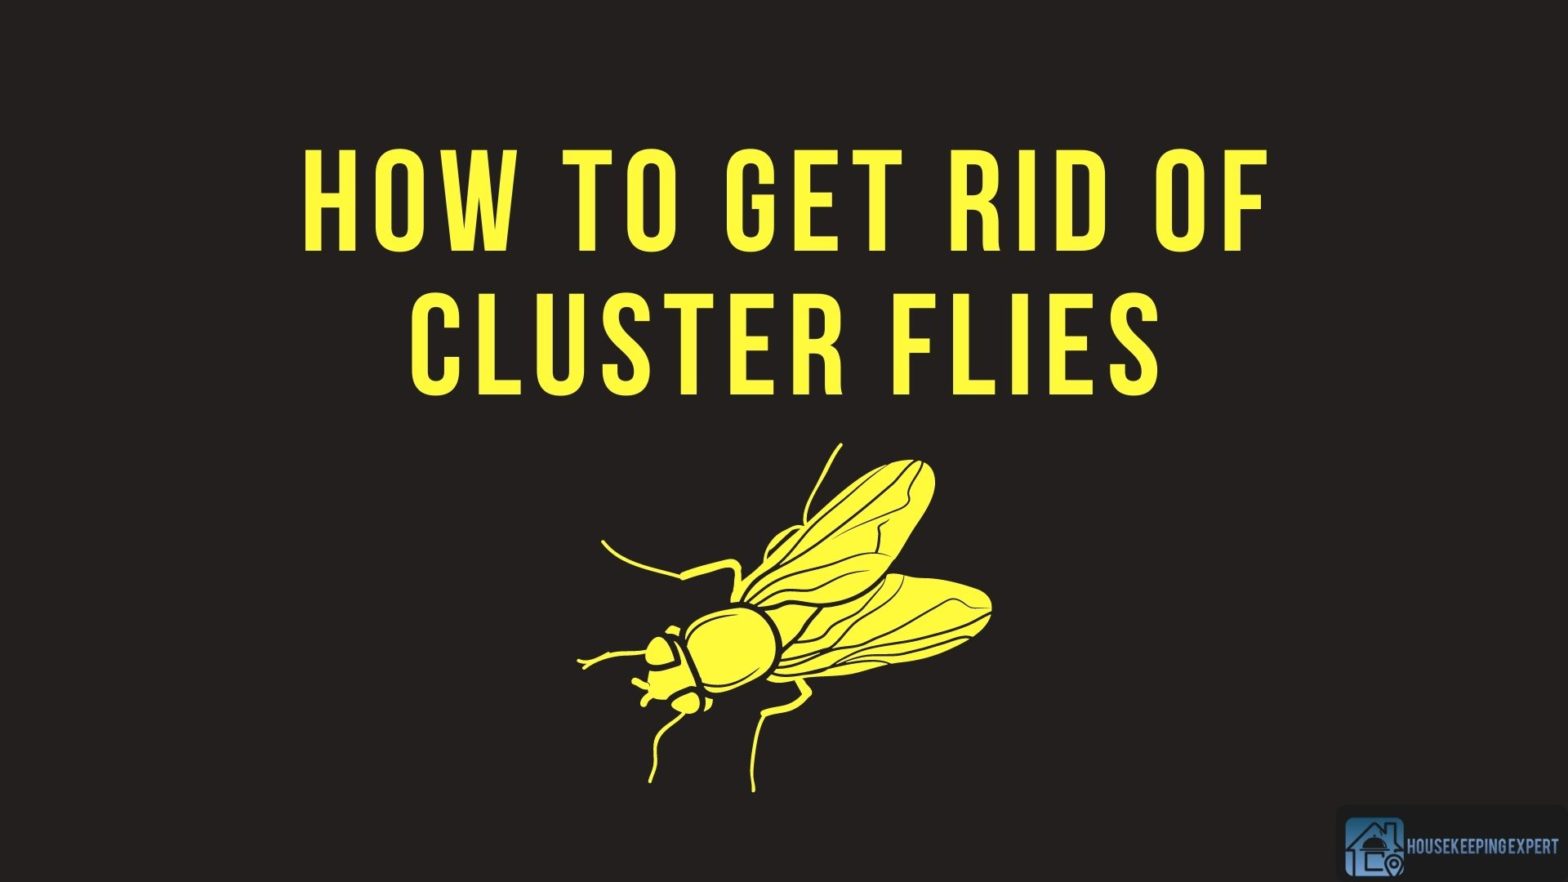 How To Get Rid Of Cluster Flies